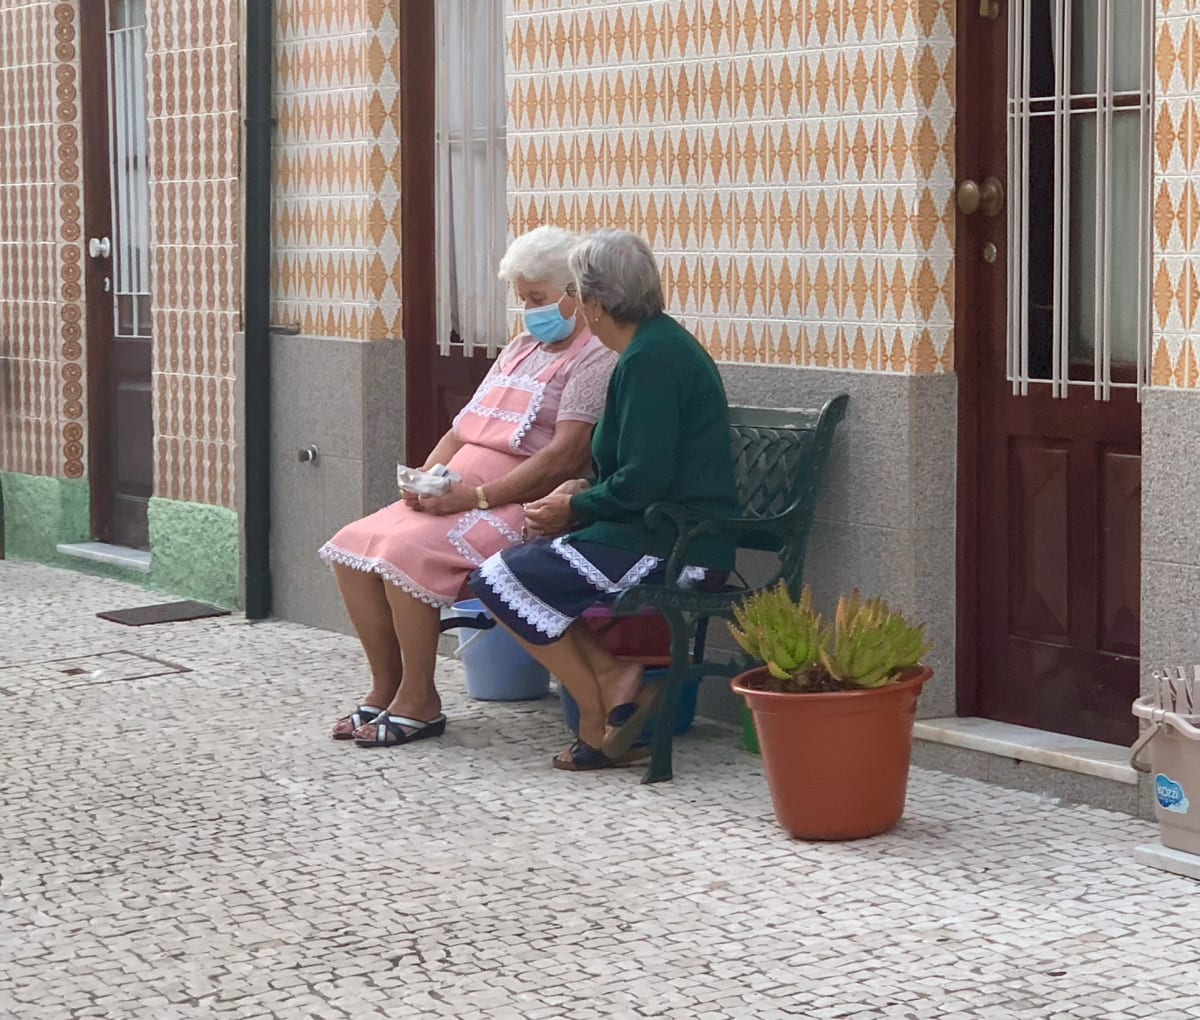 Neighbors by Louise Olko  Image: Portugal